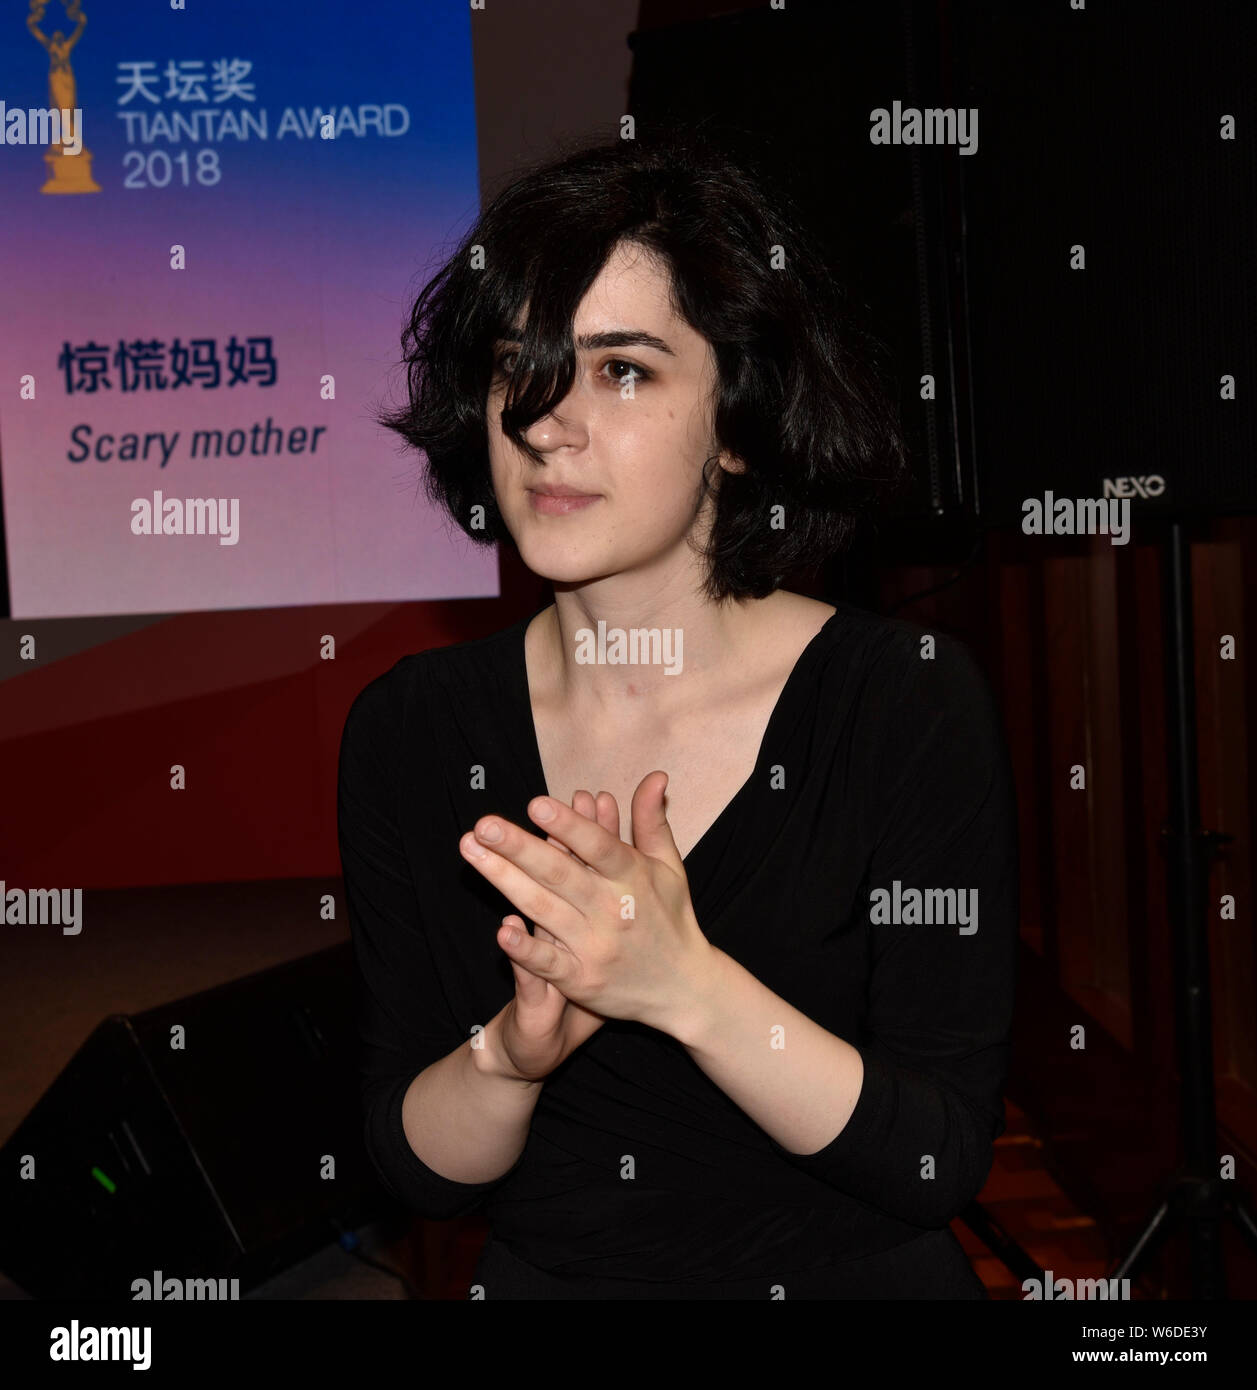 Georgian director Ana Urushadze attends the Shortlised Film Press  Conference of the Tiantan Awards during the 8th Beijing International Film  Festival Stock Photo - Alamy